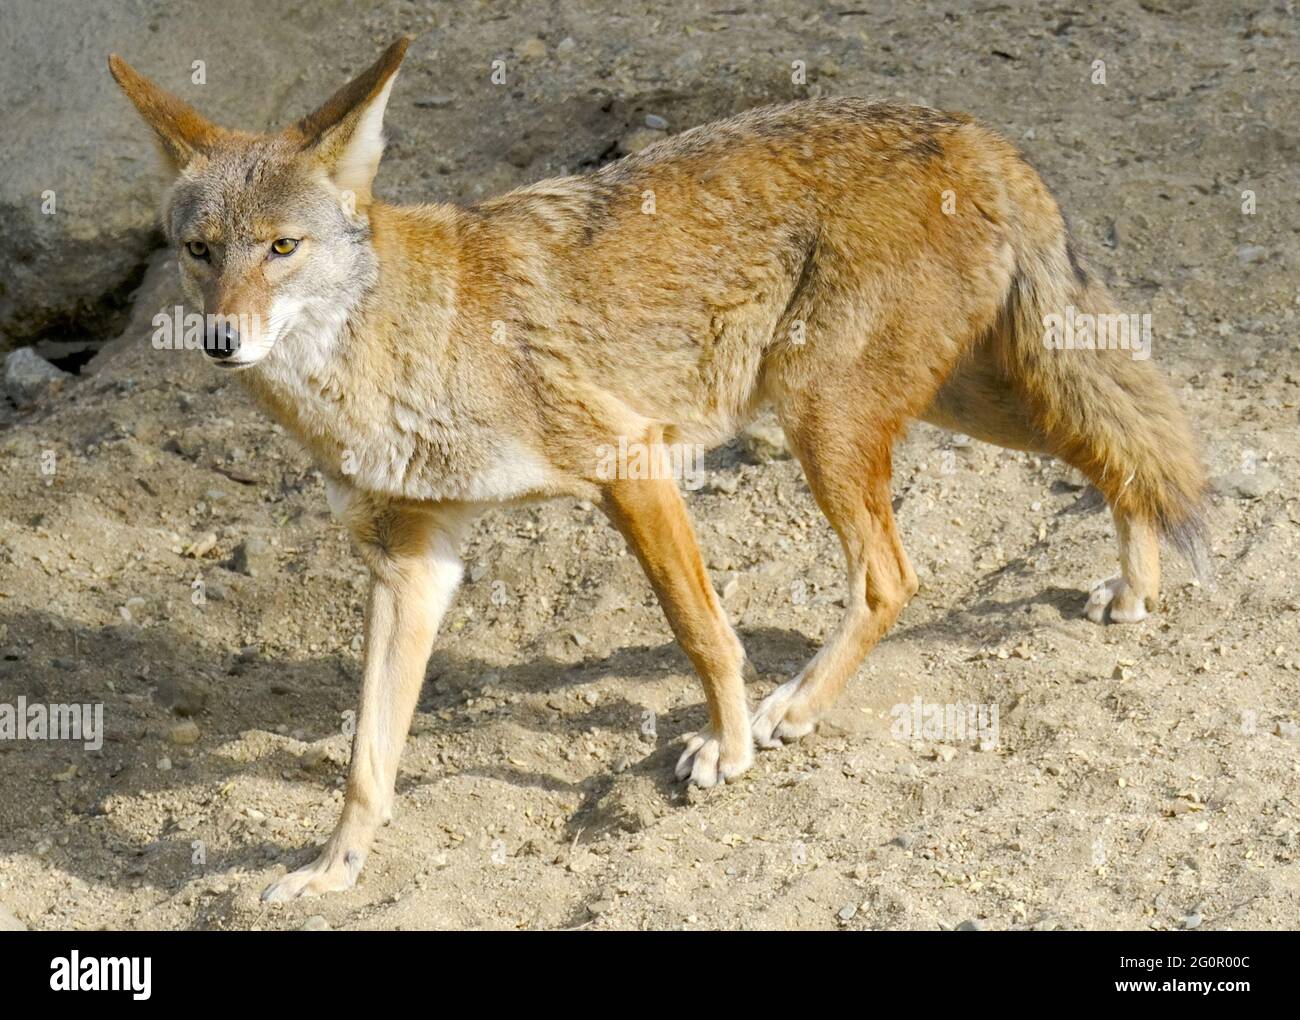 Wile E Coyote High Resolution Stock Photography and Images - Alamy